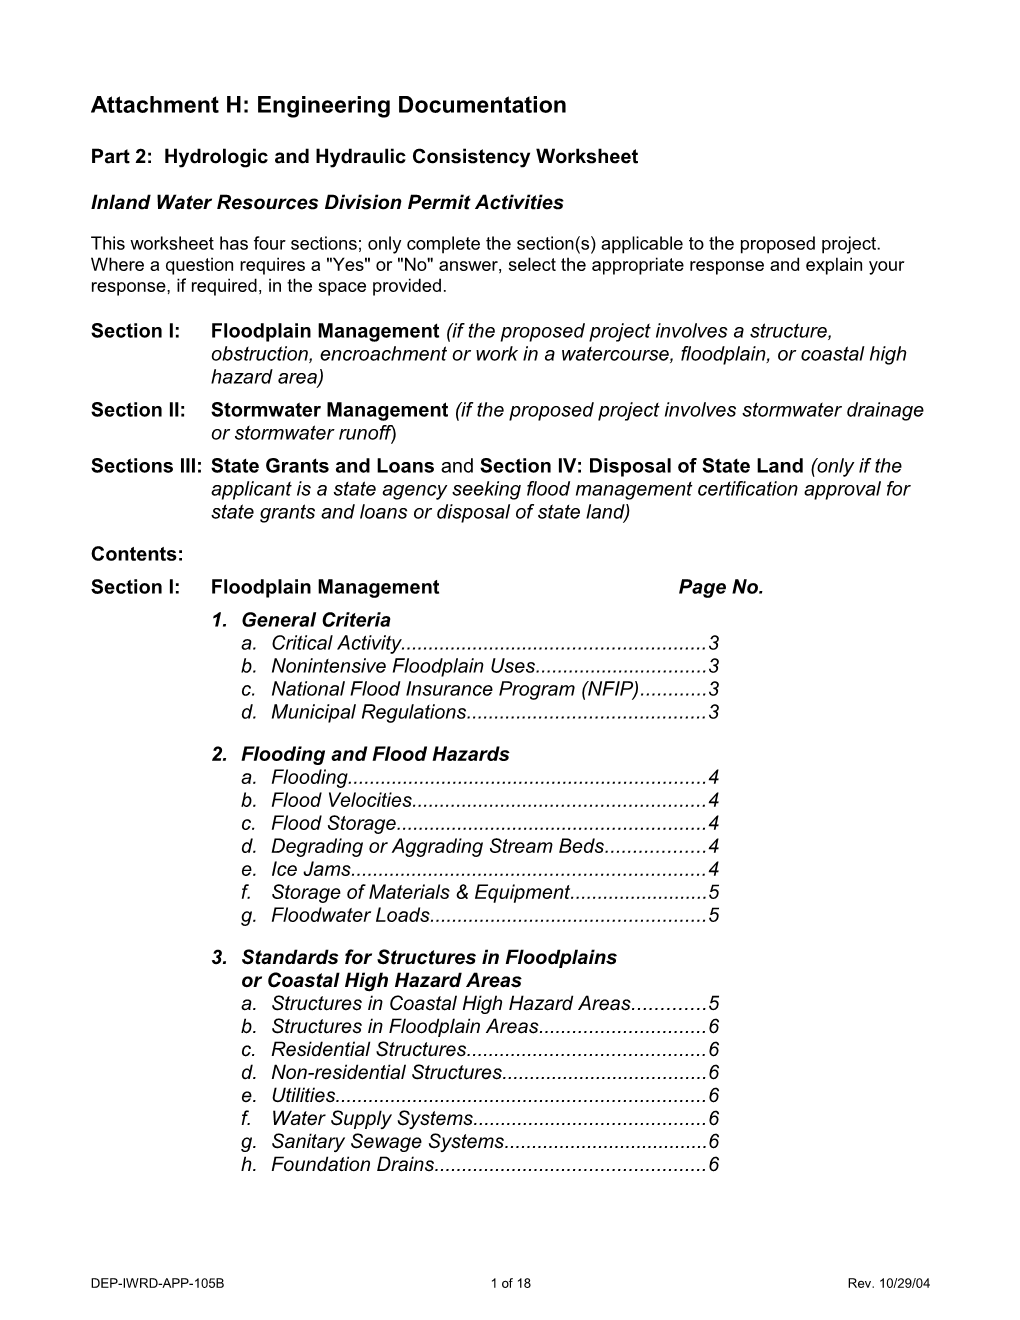 Attachment H: Engineering Documentation Part 2: Hydrologic and Hydraulic Consistency Worksheet